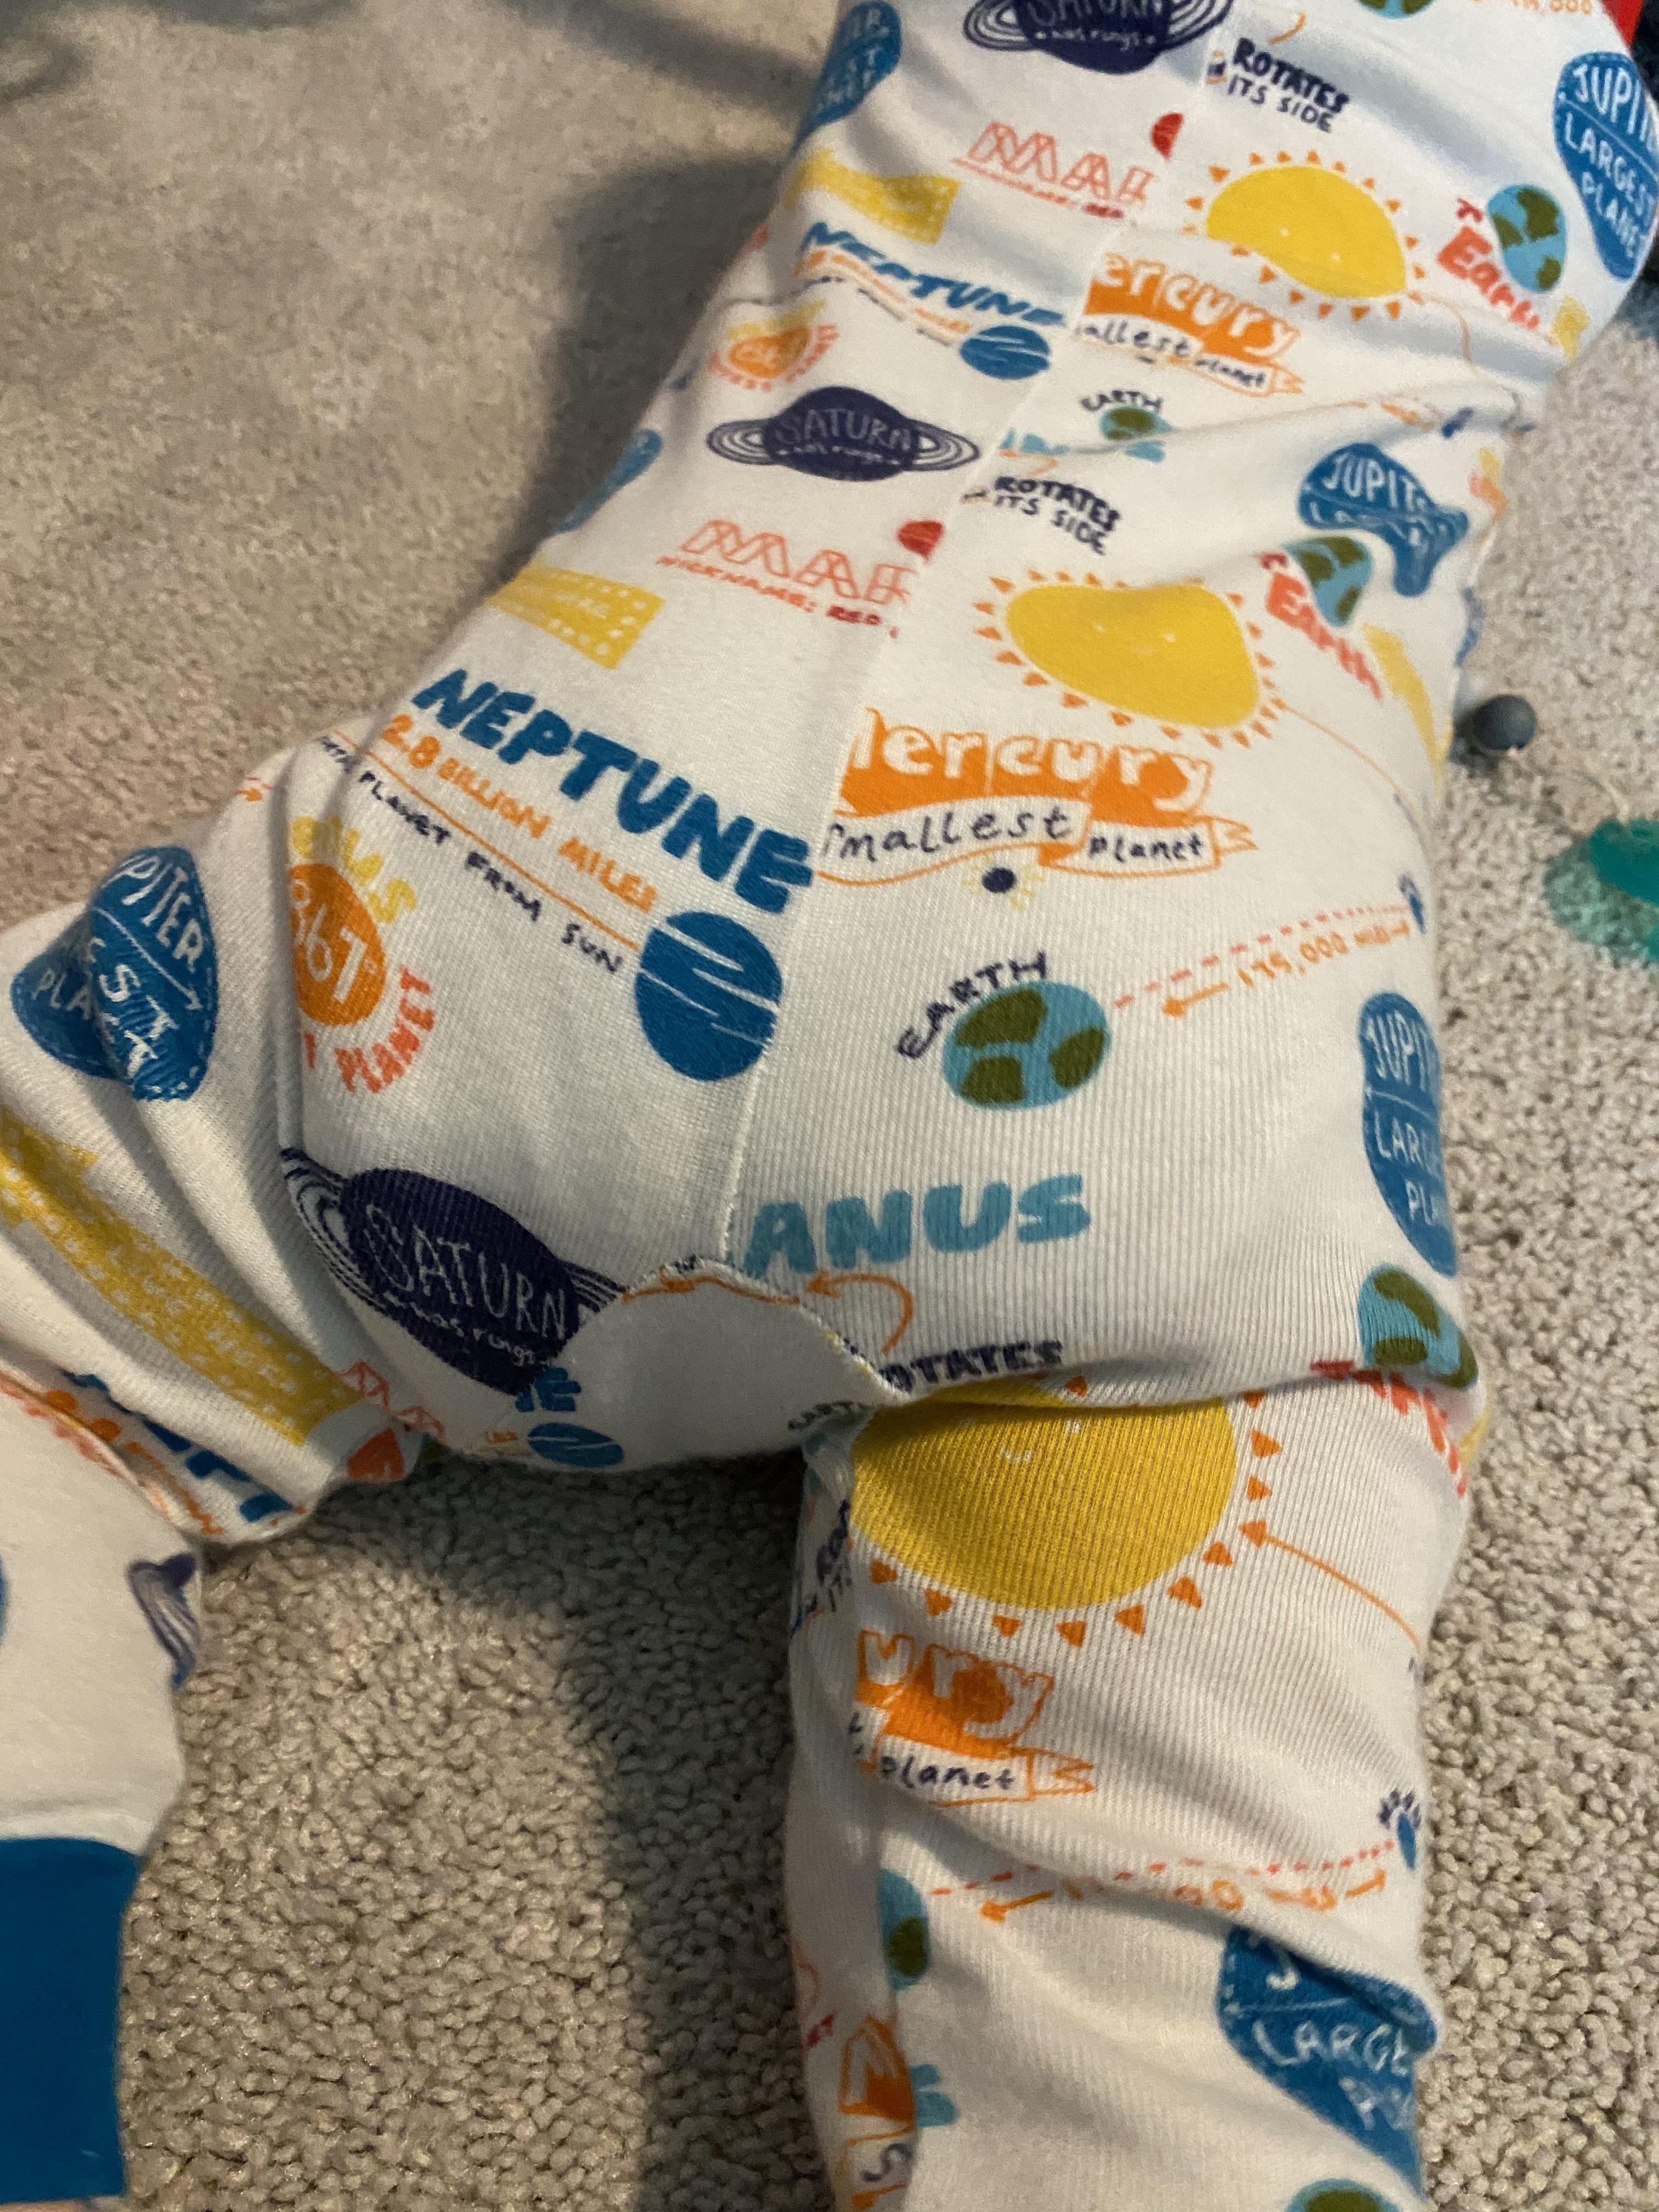 Where is Uranus? My 9mo olds PJs leave no doubt.